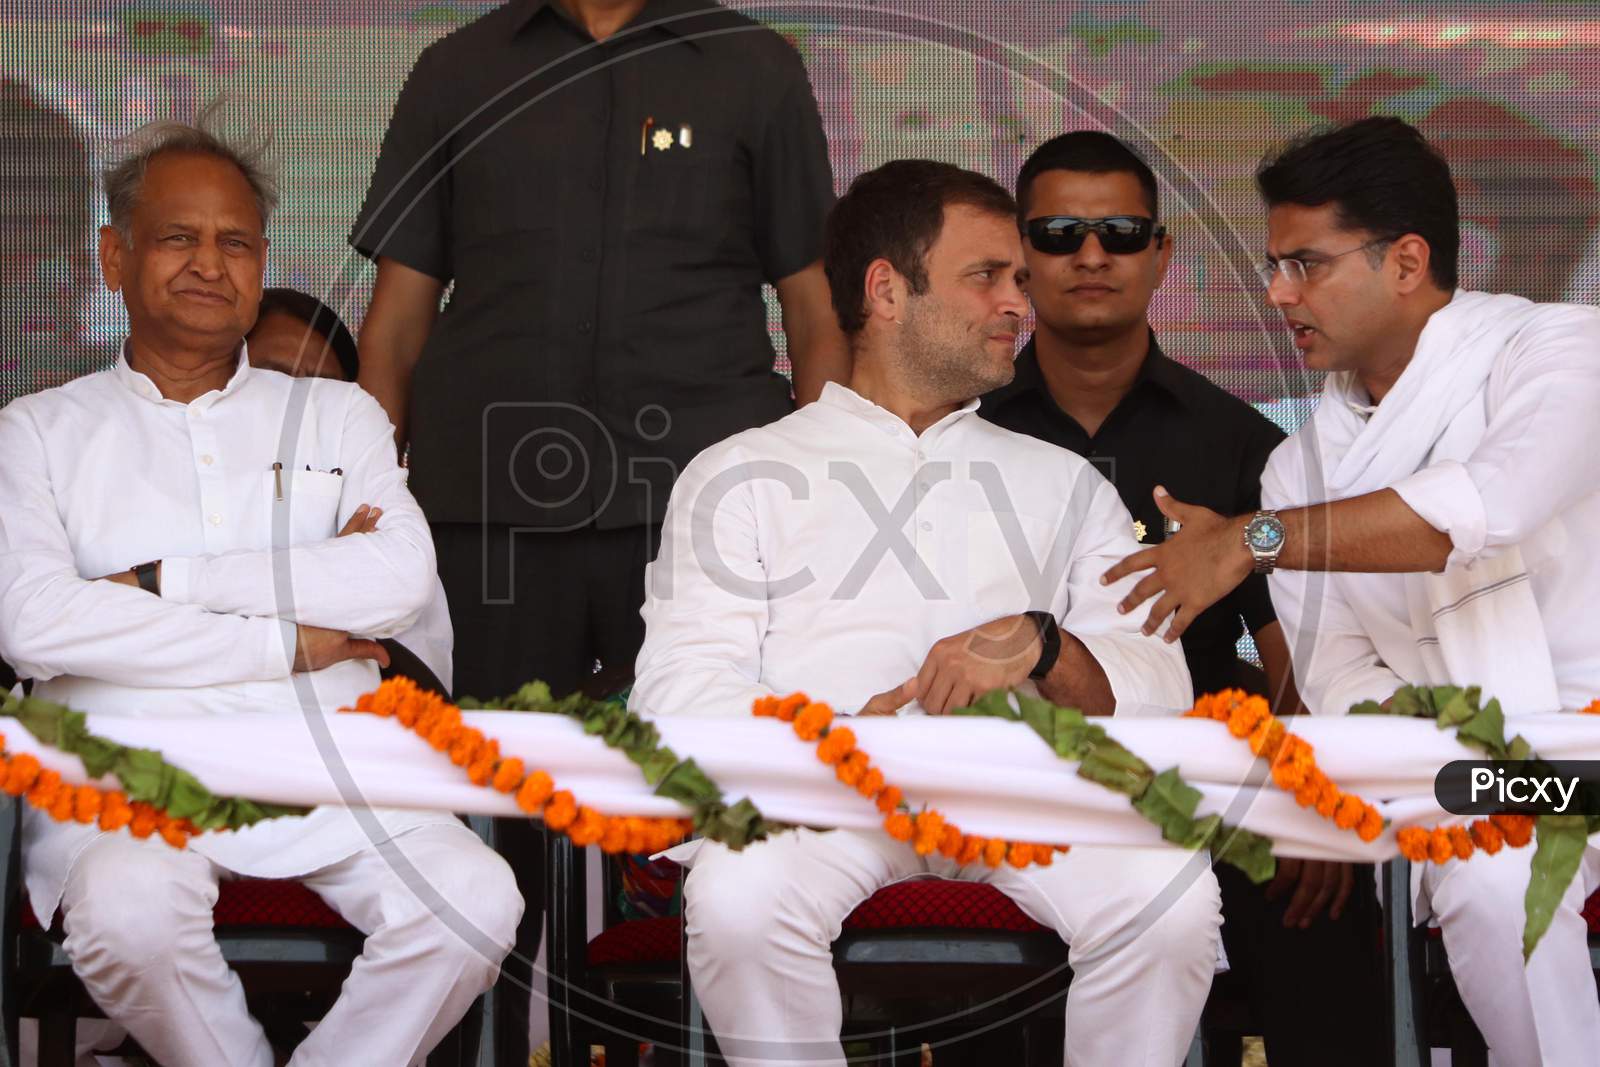 Rahul Gandhi, President of Indian National Congress(INC) with Ashok Gehlot, Chief Minister of Rajasthan and Sachin Pilot, Deputy Chief Minister of Rajasthan during an election campaign in a village near Ajmer, Rajasthan on April 25, 2019